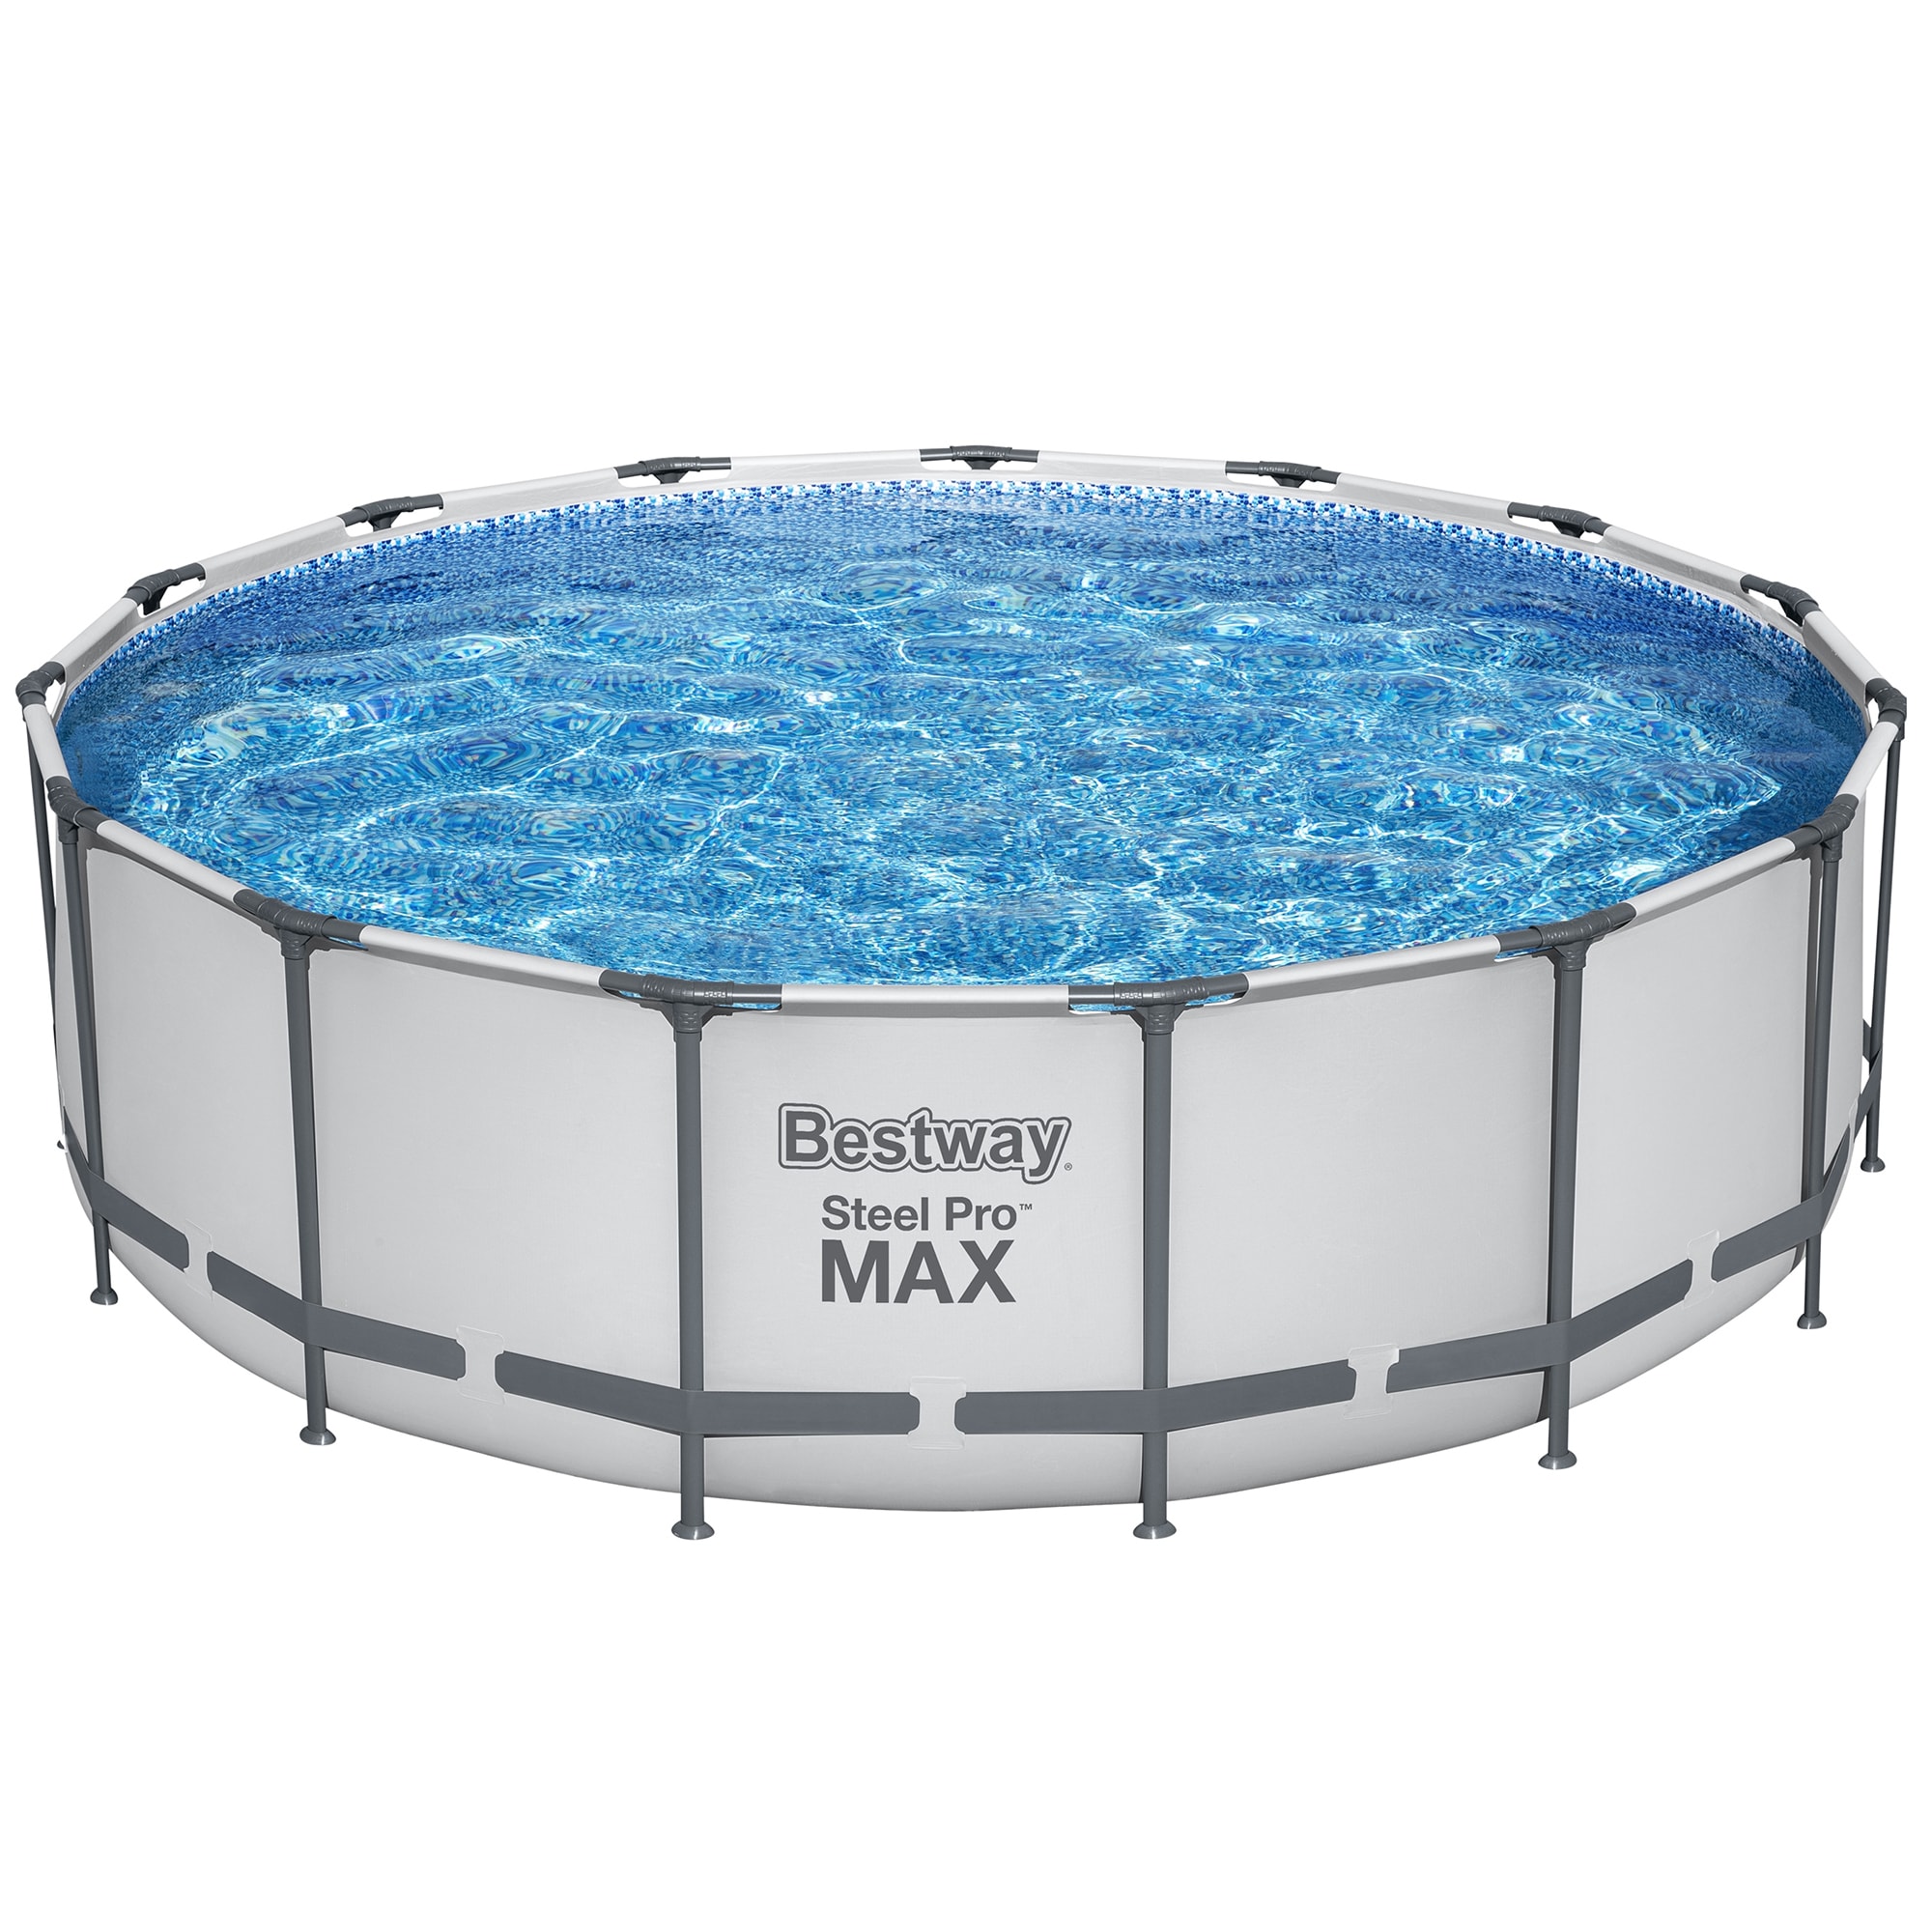 Steel Pro MAX 15' x 48" Prismatic Stone Above Ground Pool Set - image 1 of 6